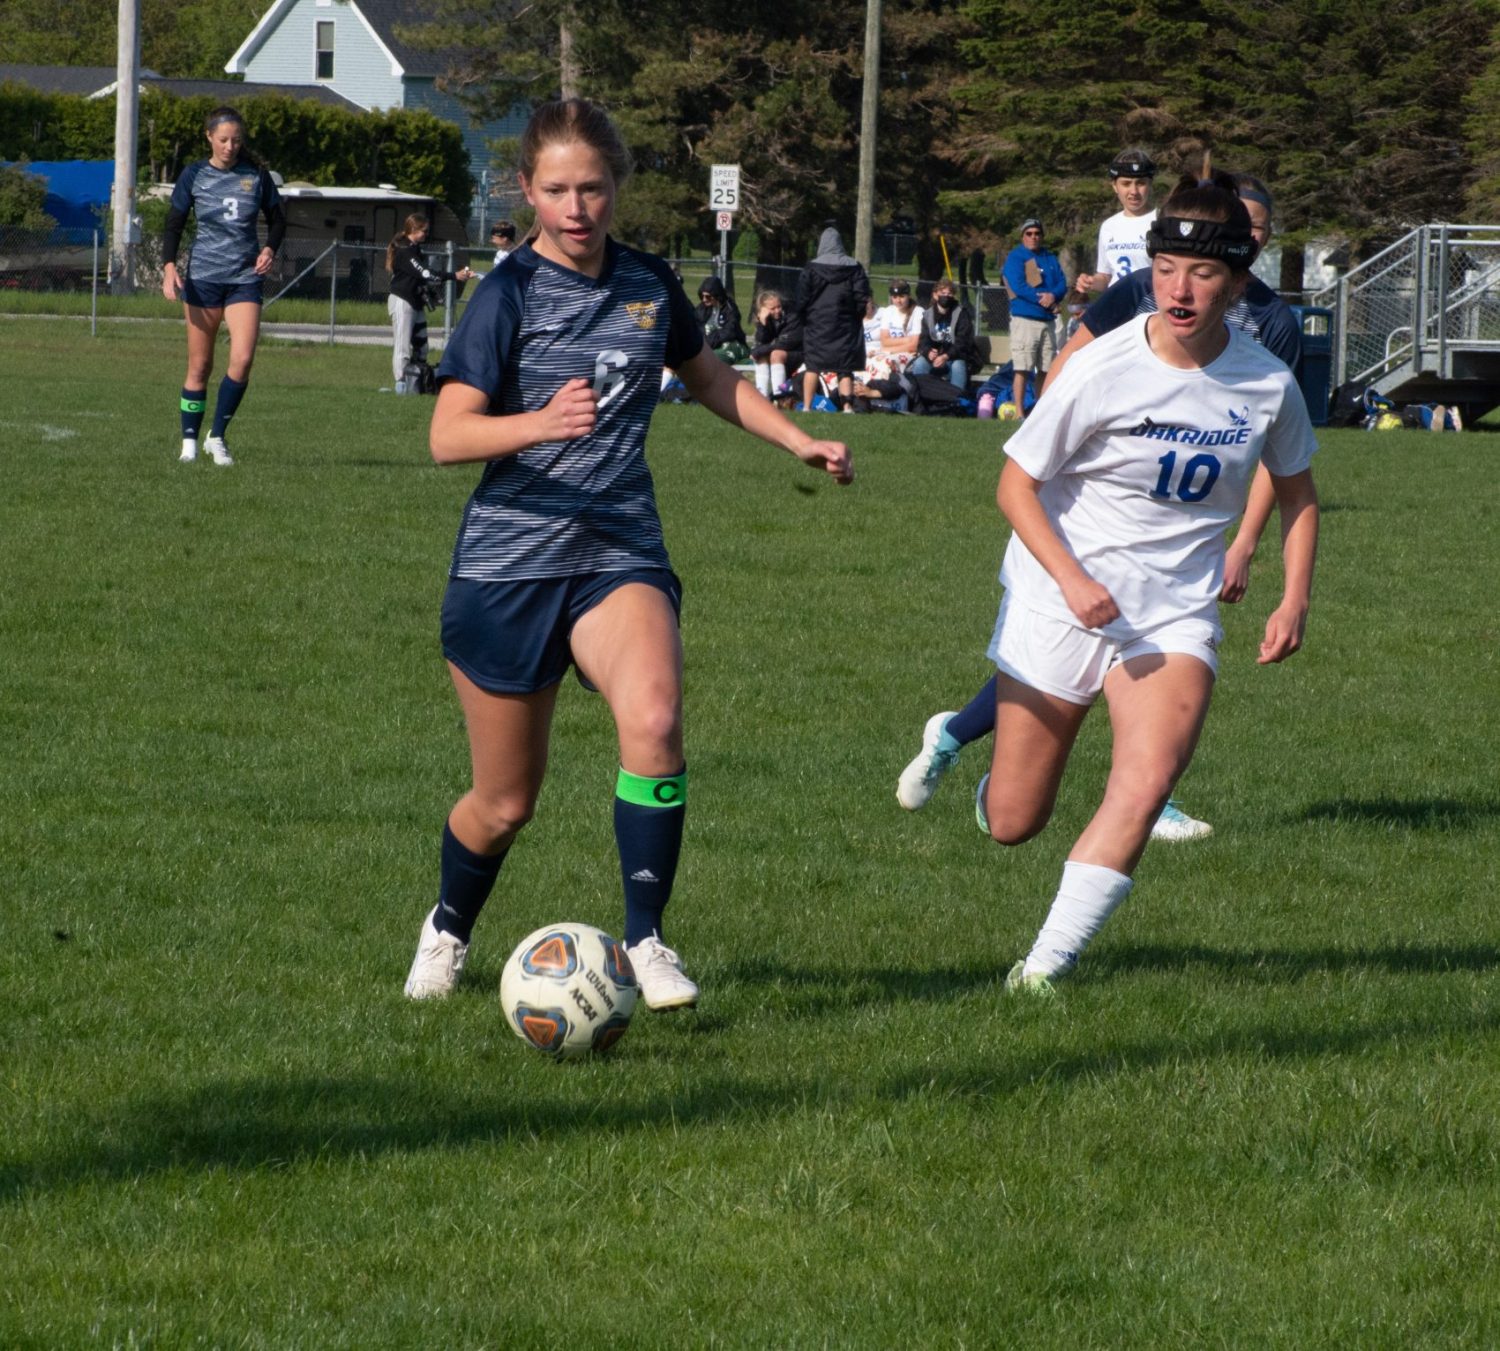 Late goal produces a tie between Oakridge, Manistee in WMC soccer match